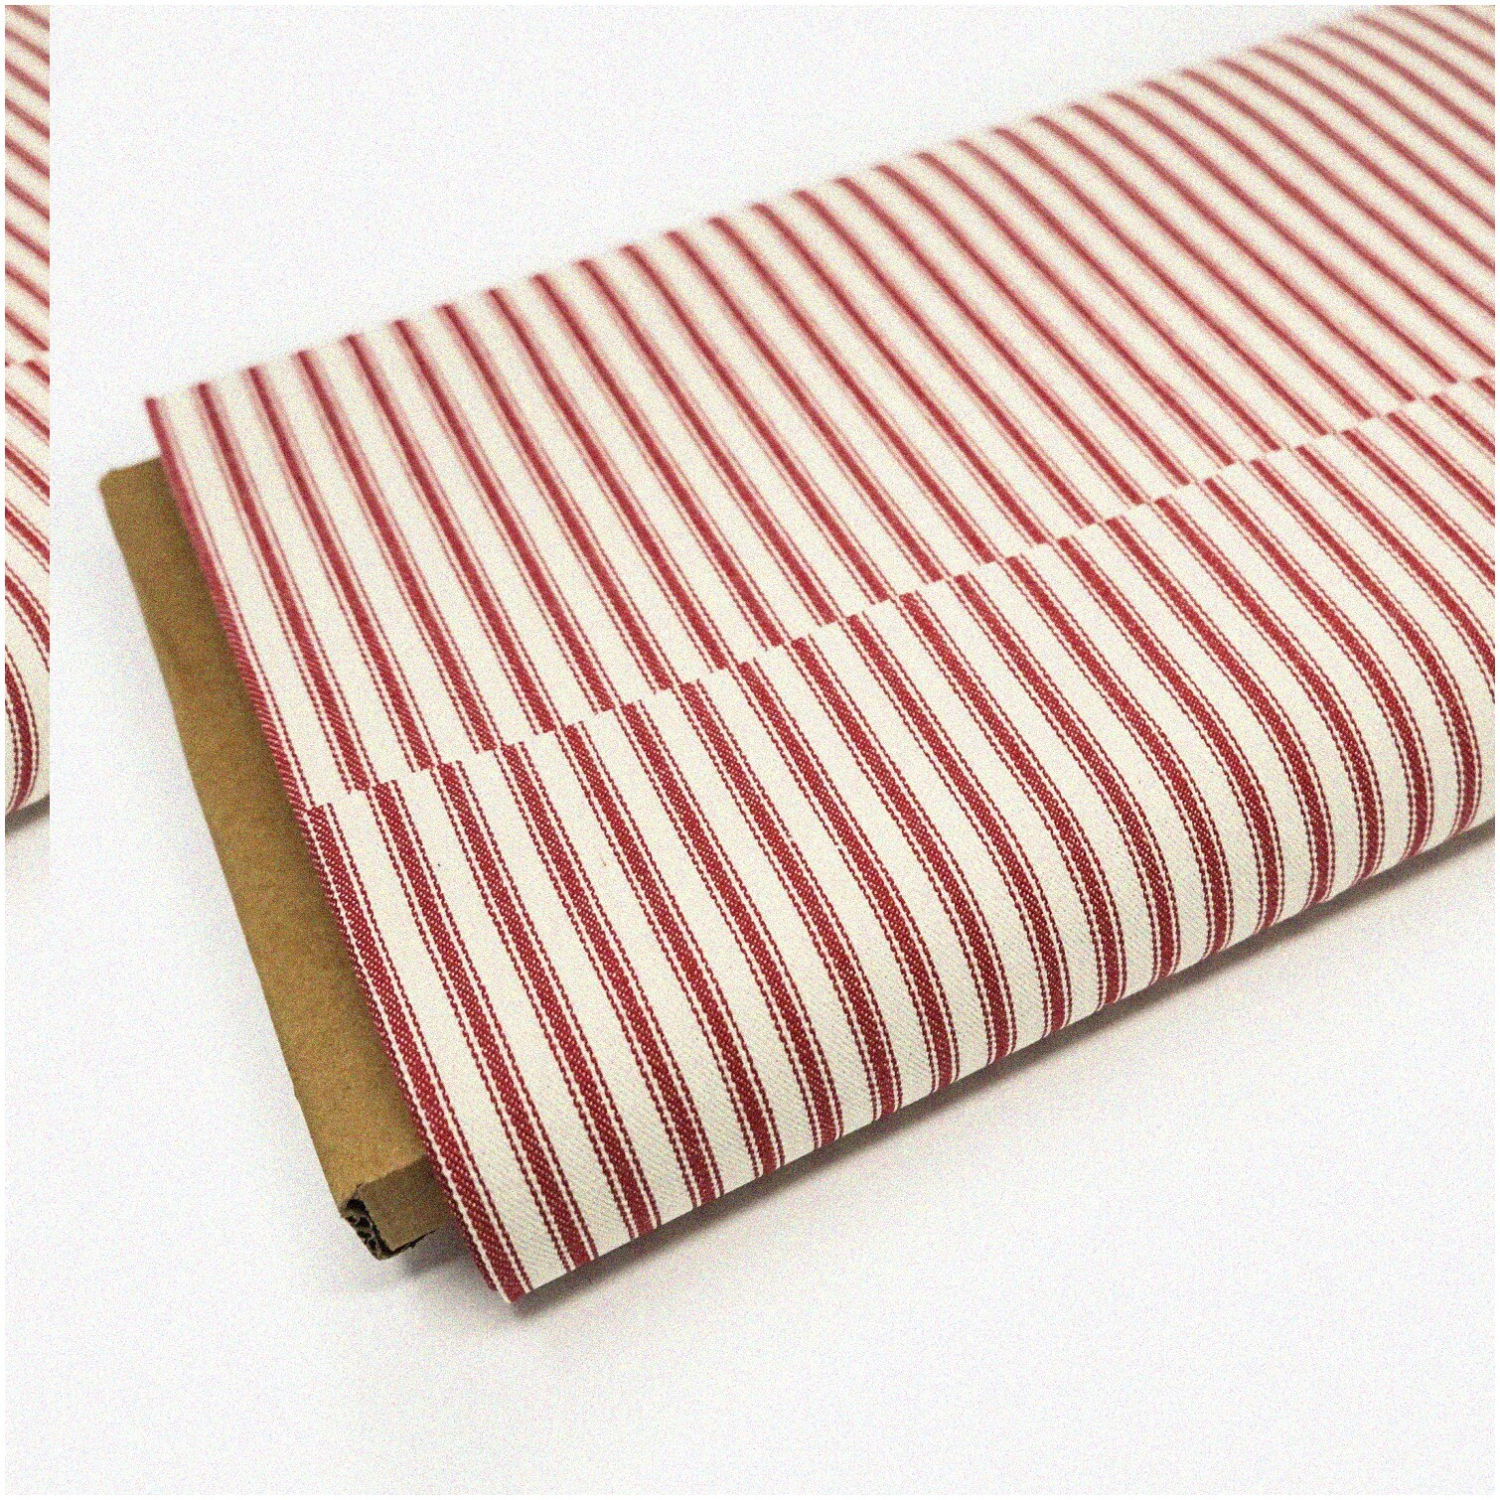 Red Stripe Cotton Ticking - Premium 100% Woven Fabric, 44/45" Width - Sold by the Yard